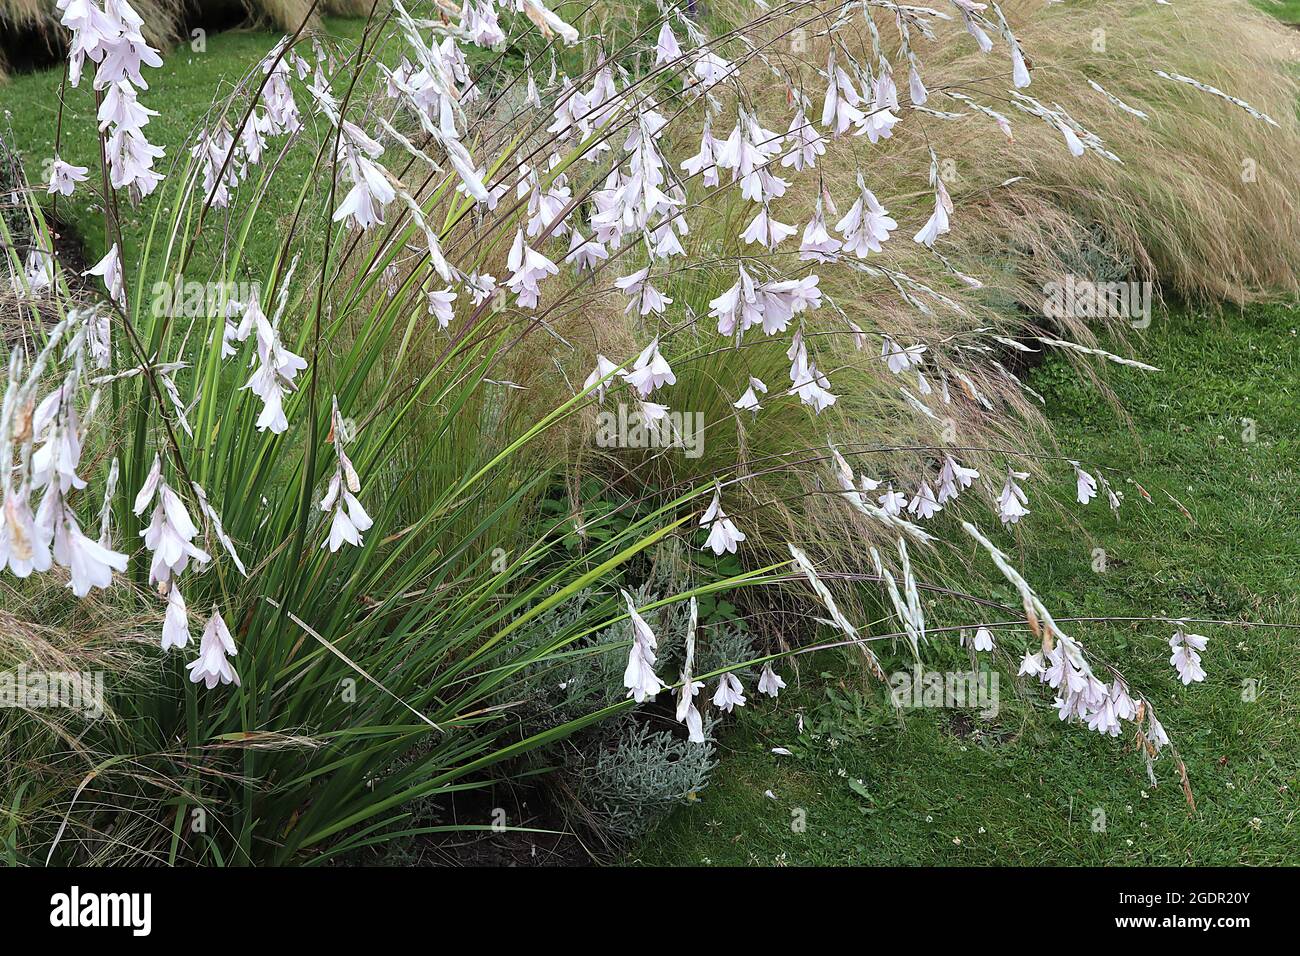 Dierama 'Guinevere' angels fishing rod Guinevere – arching stems of white  pendulous flowers, July, England, UK Stock Photo - Alamy